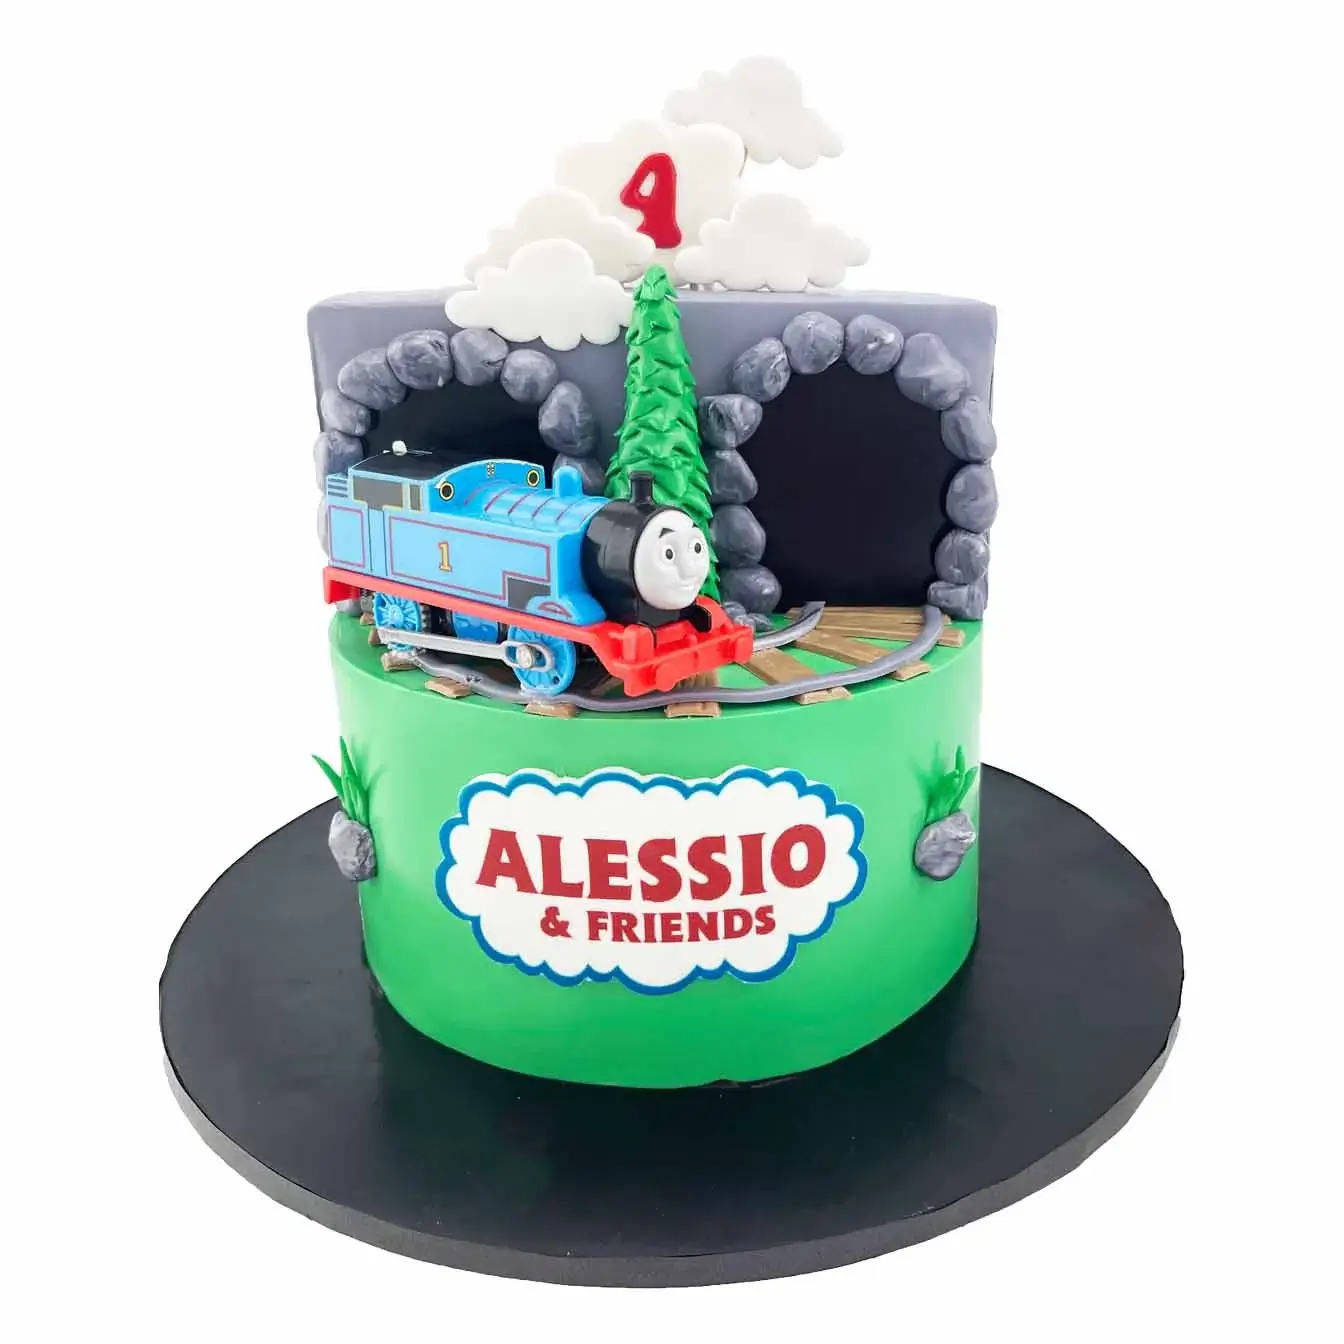 Thomas the Tank Engine Adventure Cake - A cake featuring a detailed Thomas train and a charming tunnel, a delightful centerpiece for fans of Thomas and his Island of Sodor adventures.